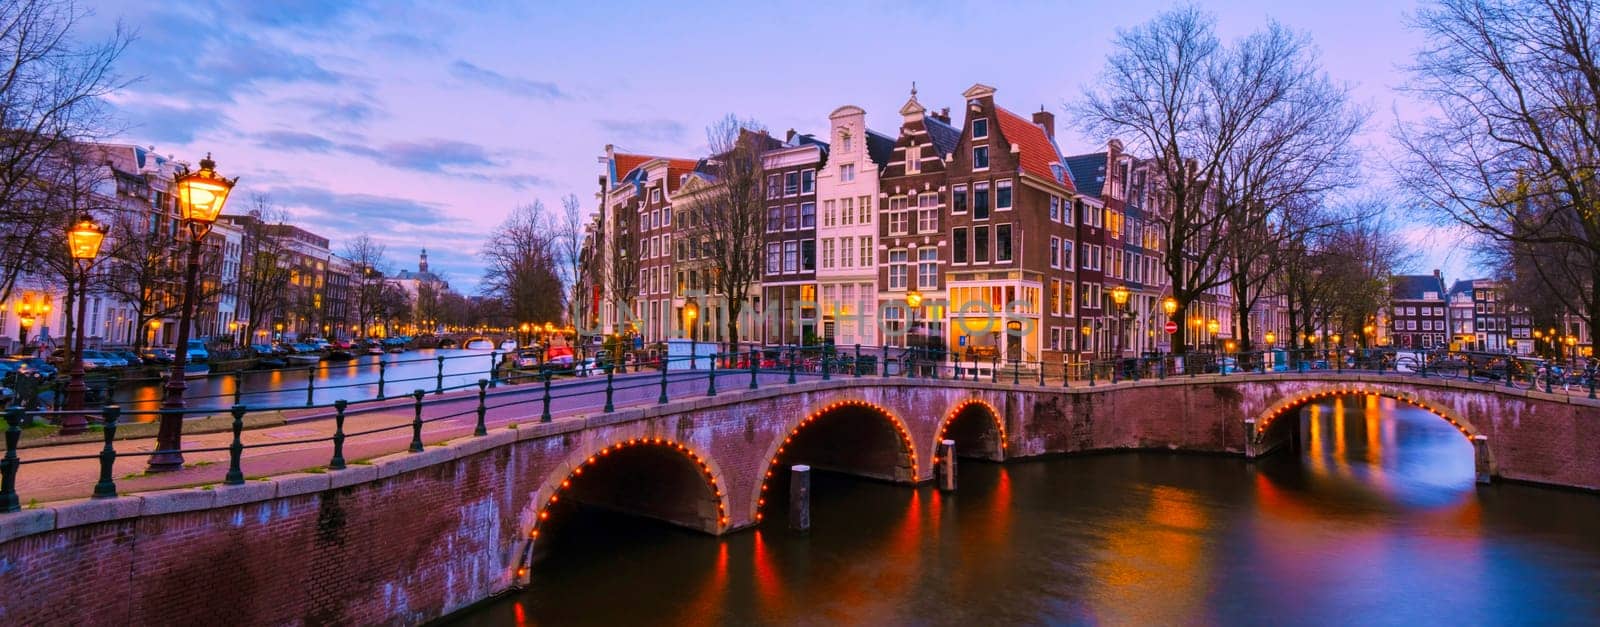 Amsterdam Netherlands canals with lights during evening in December during winter in the Netherlands by fokkebok